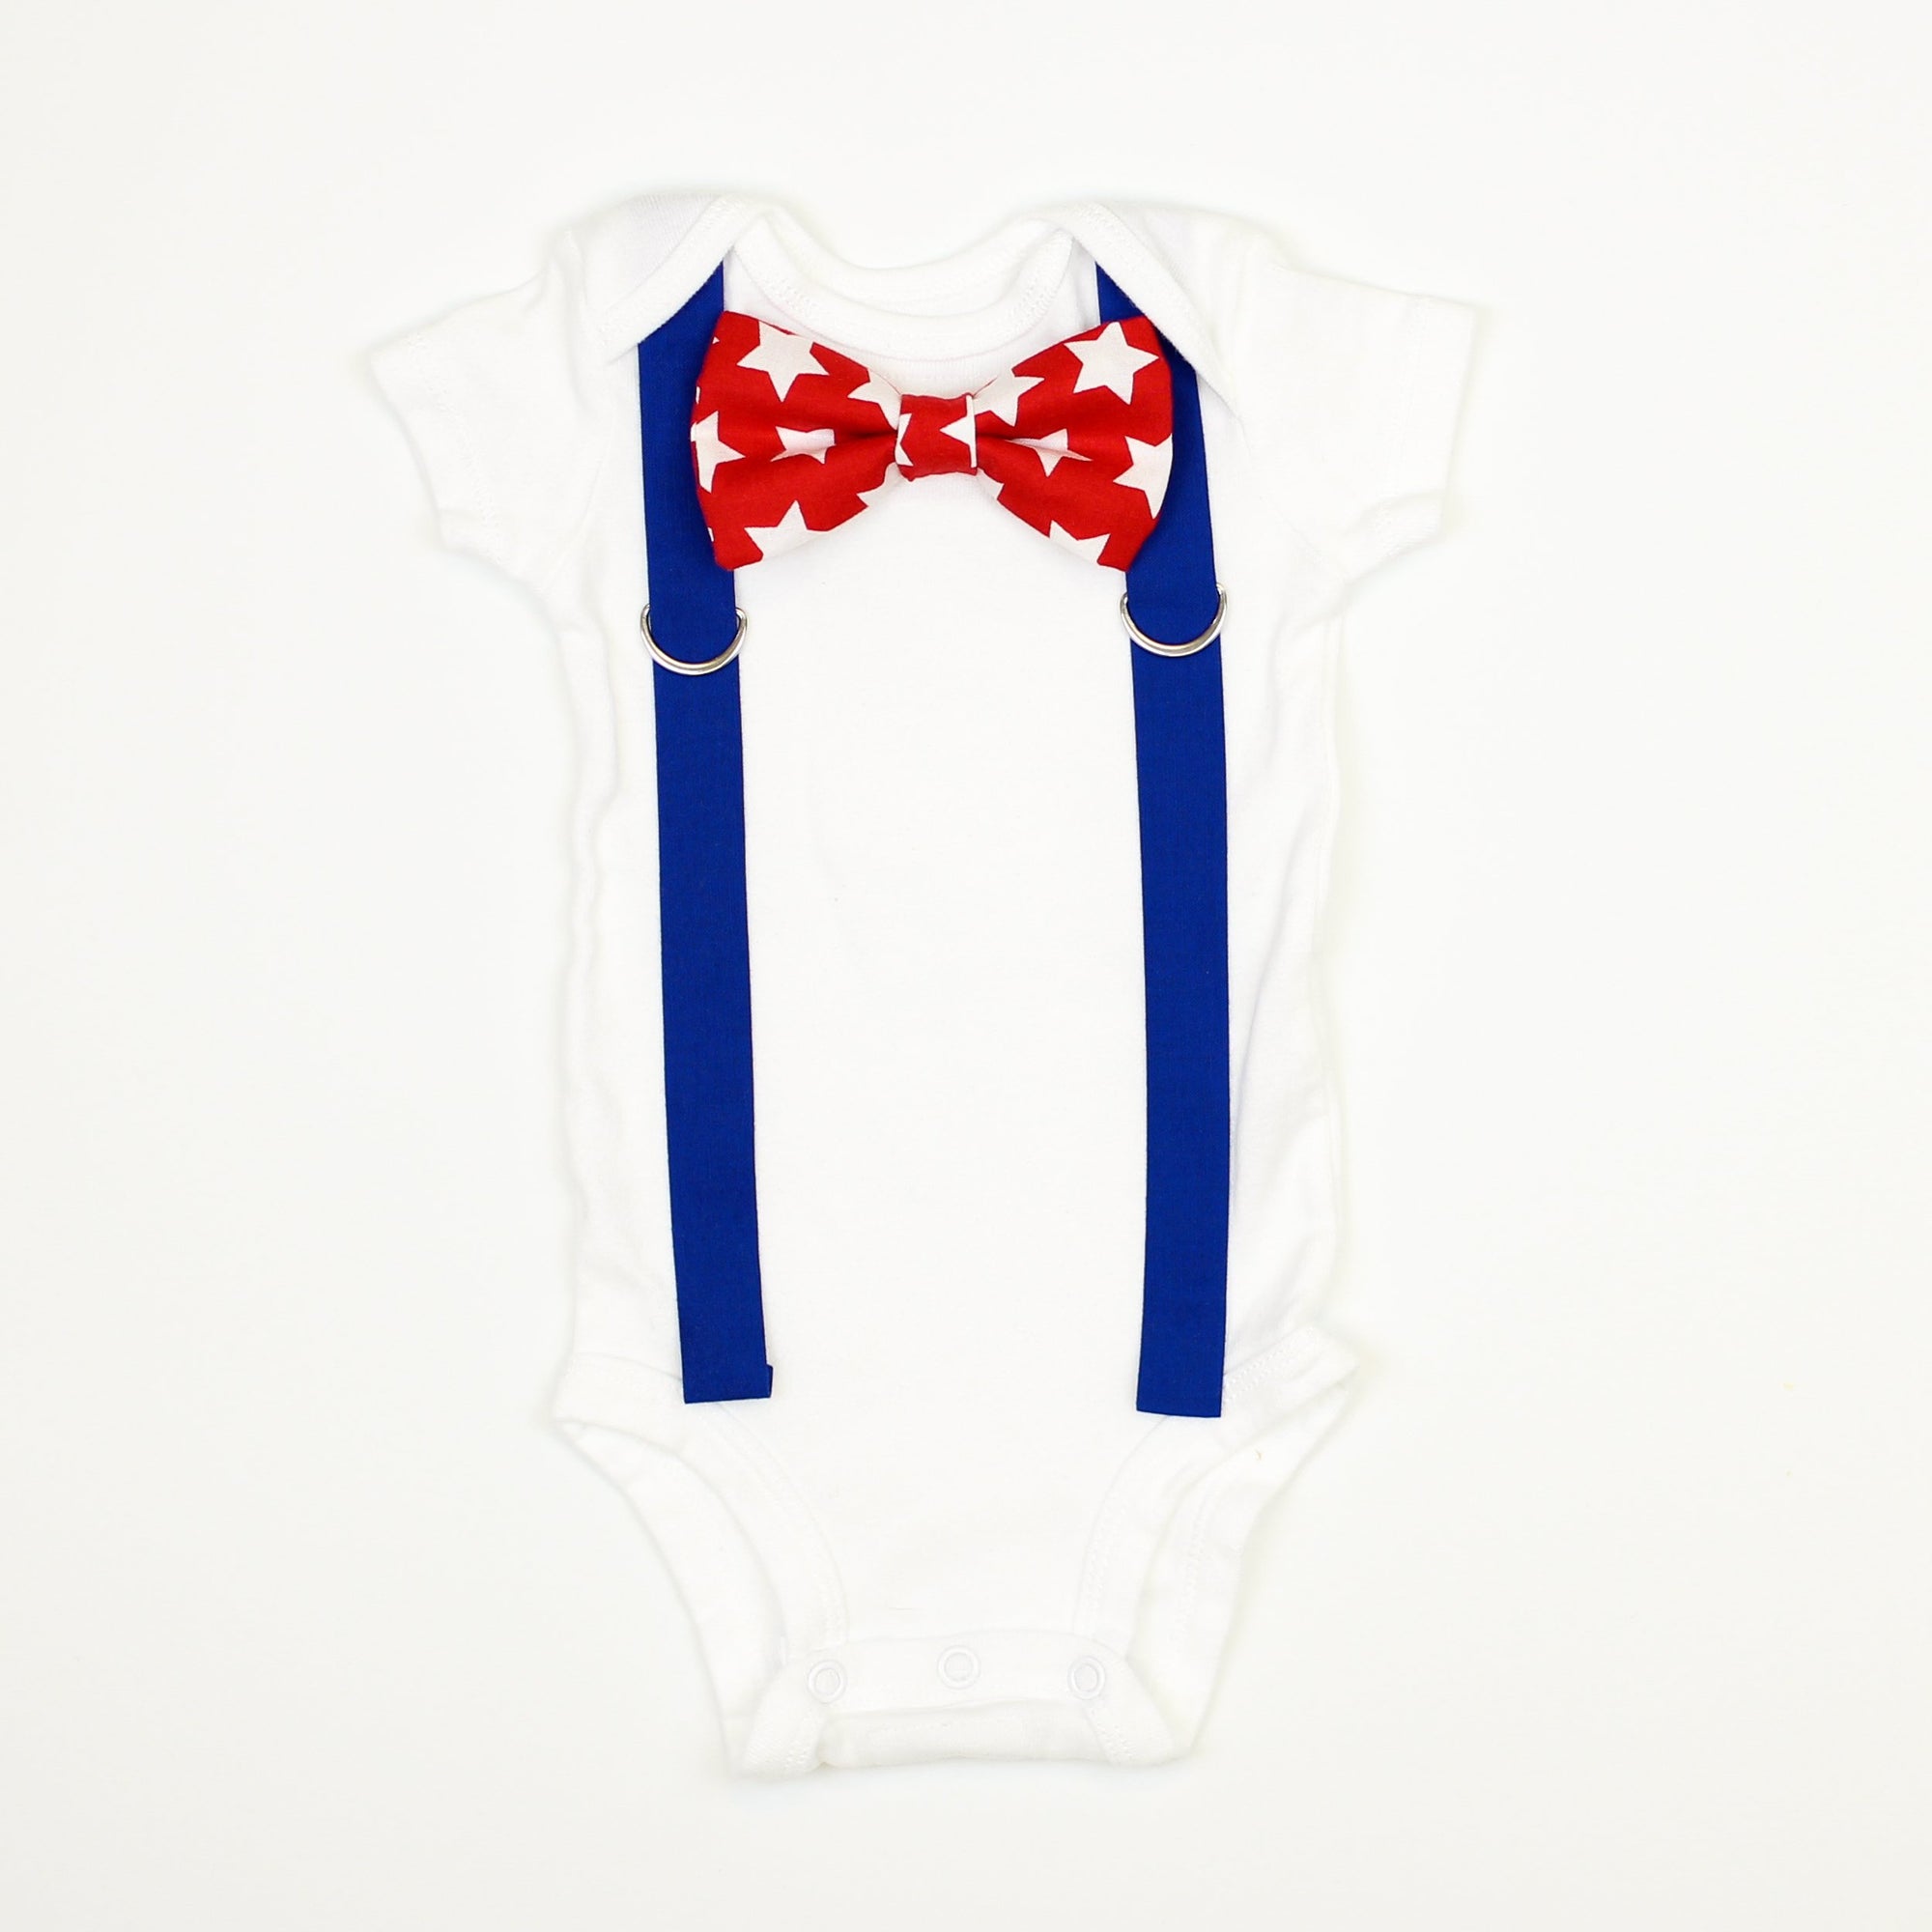 Royal Blue Suspenders | Red Stars Bow Tie